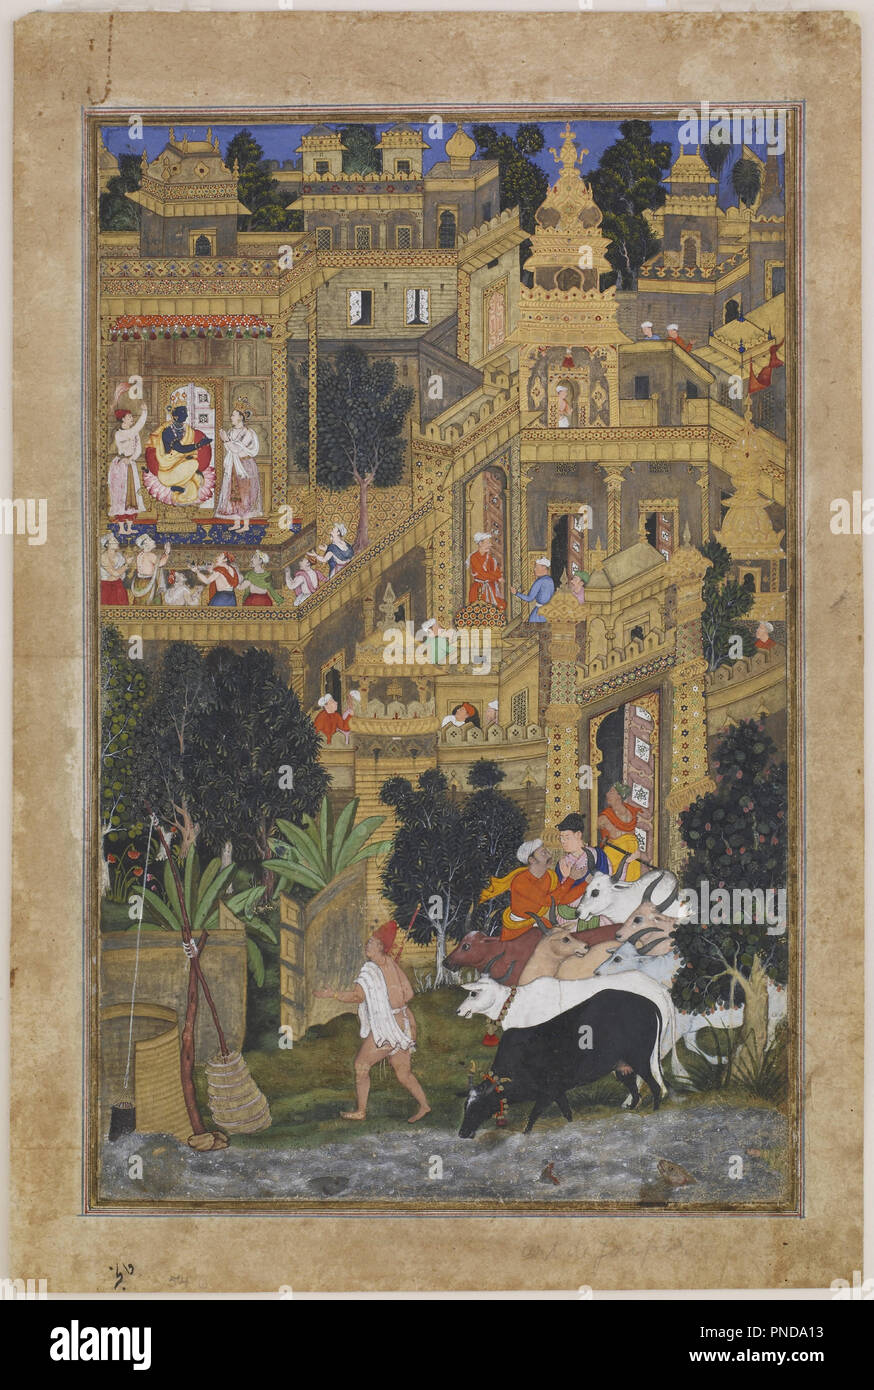 The Lord Krishna in the Golden City (Harivamsha)     From harivamsa ,an appendix of Razmnama. Date/Period: Ca. 1585. Painting / watercolor painting. Opaque watercolor and gold on paper. Height: 34.9 cm (13.7 in); Width: 23.2 cm (9.1 in). Author: Kesu Kalan and Miskin. Kalan, Kesav. Stock Photo